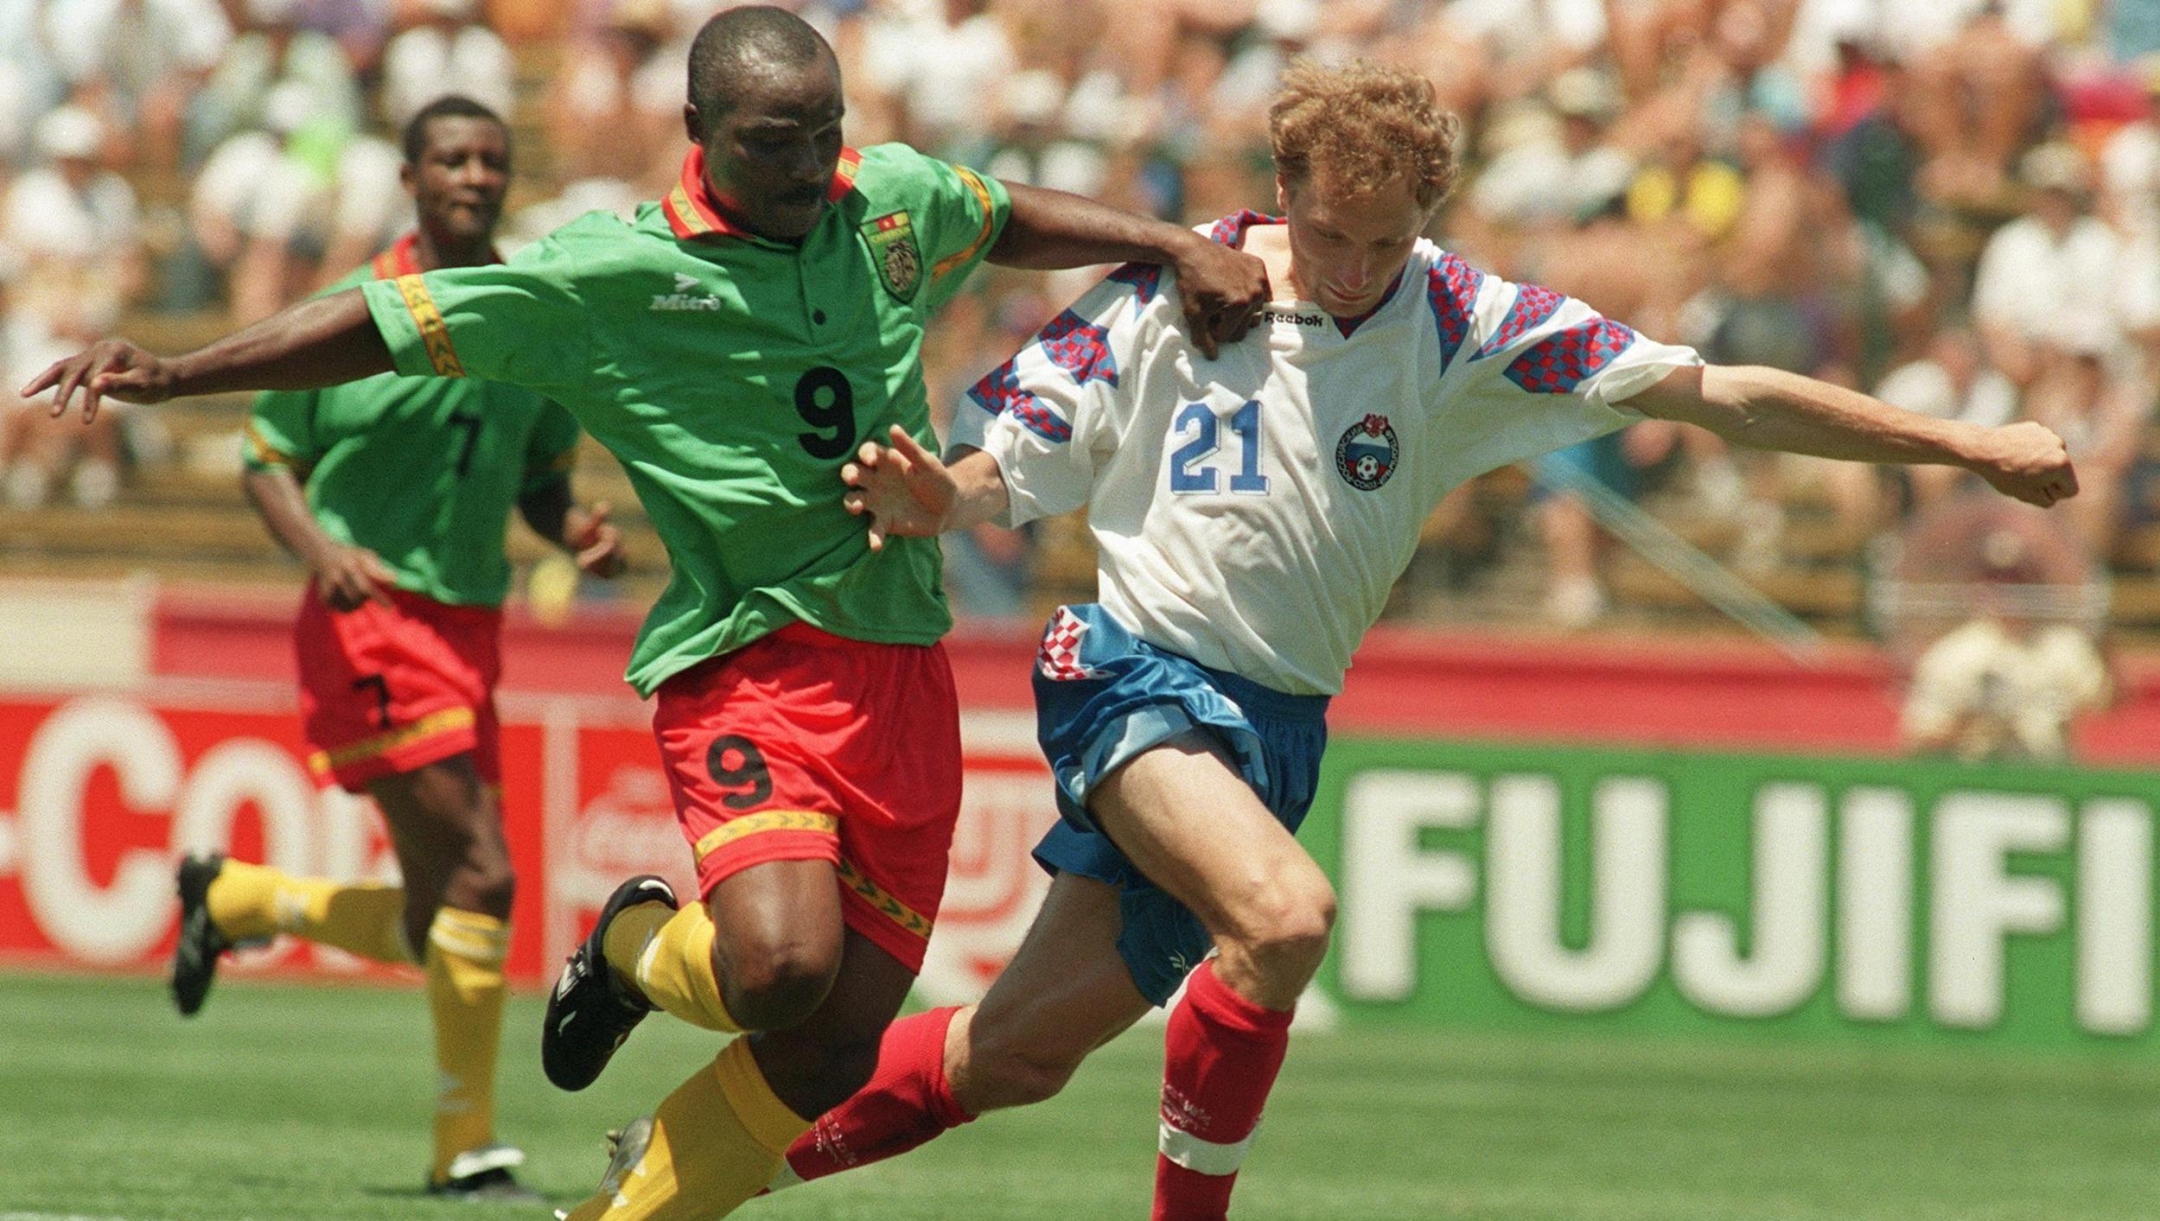 Cameroon's forward Roger Milla (L) runs past Russia's Dimitri Khlestov on his way to score a goal 28 June 1994 at Stanford stadium in San Francisco during their Soccer World Cup match. At age 42, Roger Milla became the oldest player ever to score a goal in World Cup history, but could not help his team as Russia won 6-1 with forward Oleg Salenko, scoring a record 5 goals. AFP PHOTO/ANTONIO SCORZA